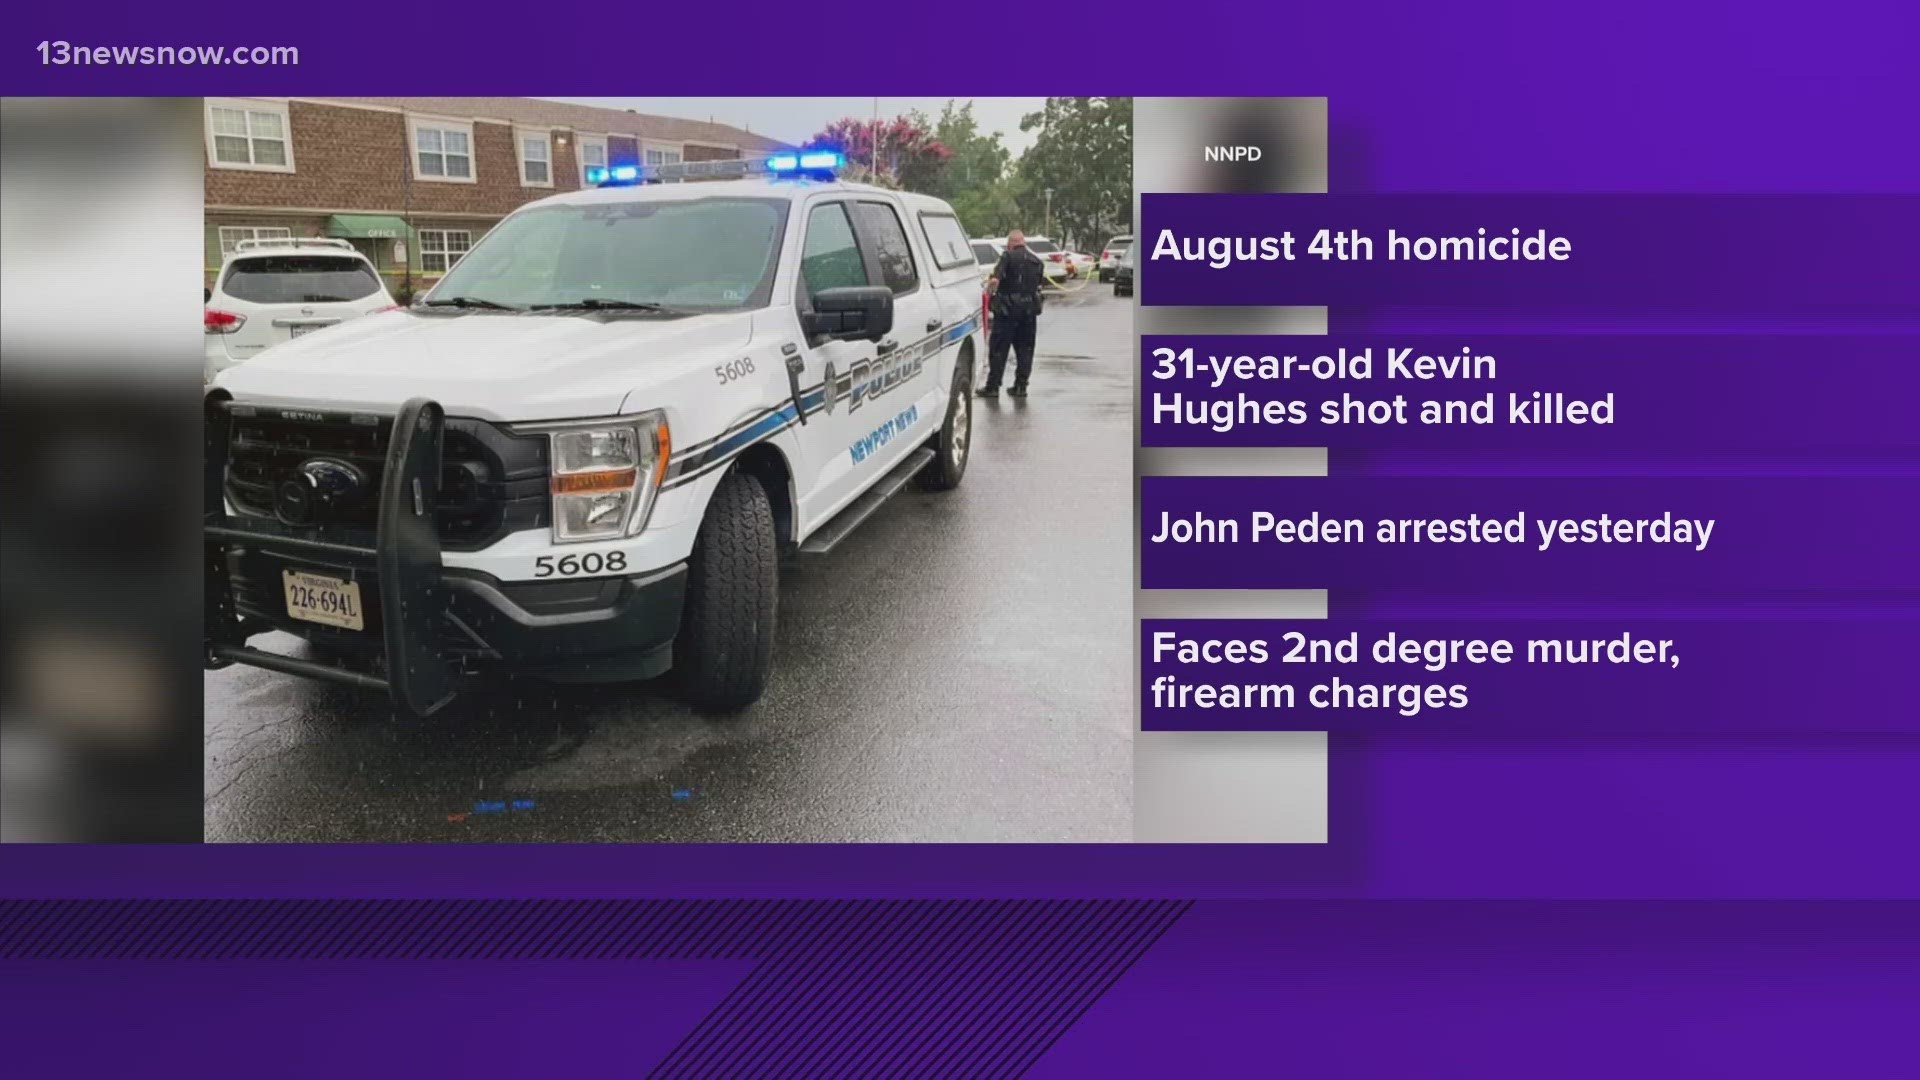 Police say John Peden is behind bars for allegedly shooting and killing 31-year-old Kevin Hughes in Newport News.